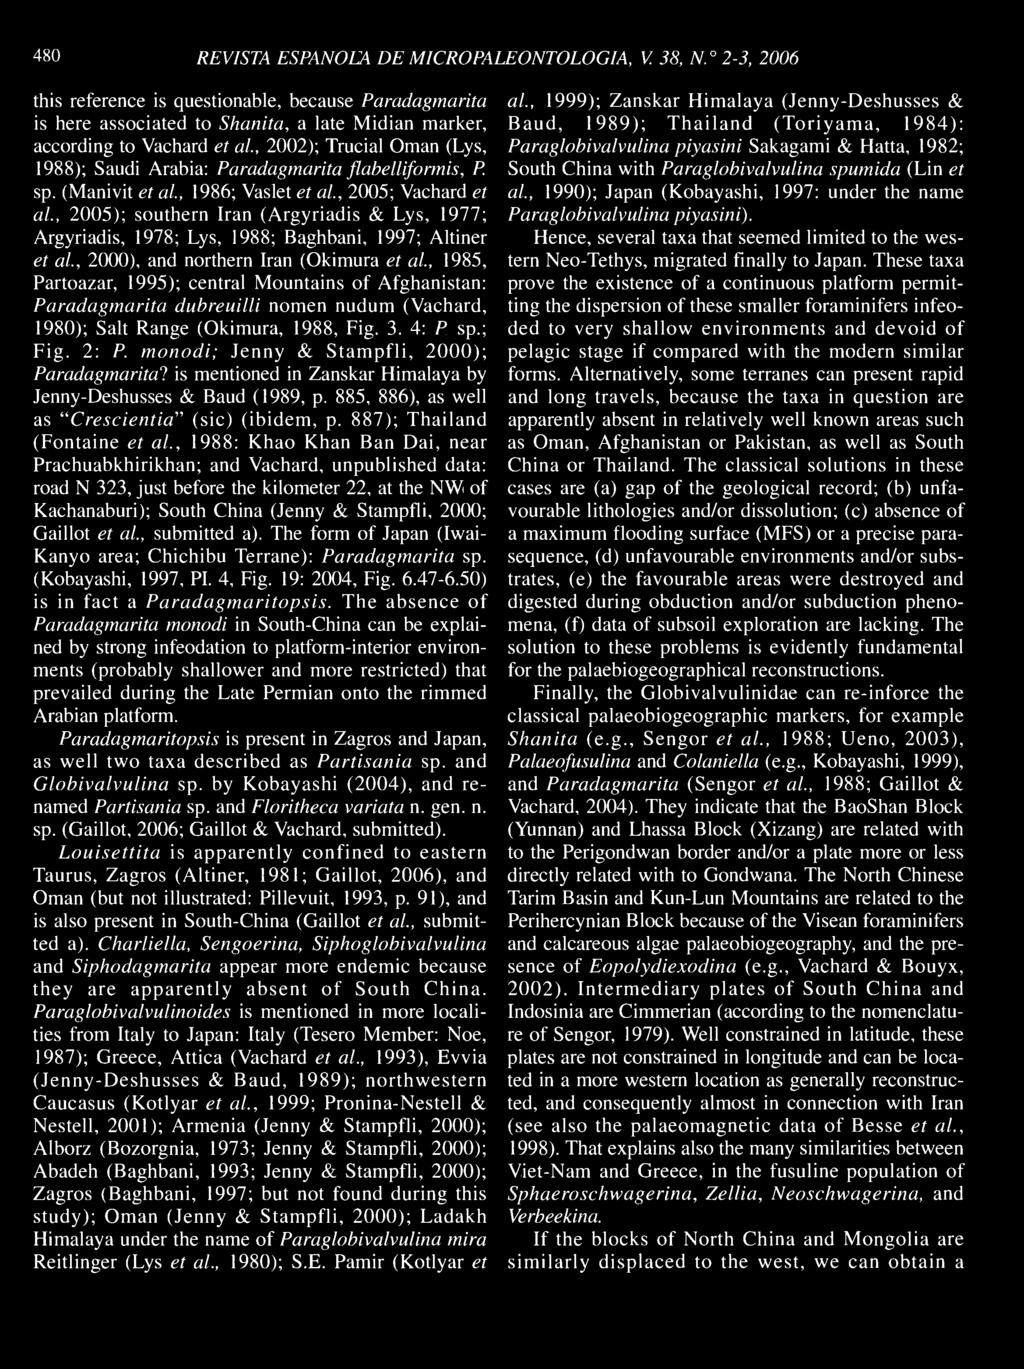 480 REVISTA ESPANOLA DE MICROPALEONTOLOGIA, V. 38, N. 2-3, 2006 this reference is questionable, because Paradagmarita is here associated to Shanita, a late Midian marker, according to Vachard et al.